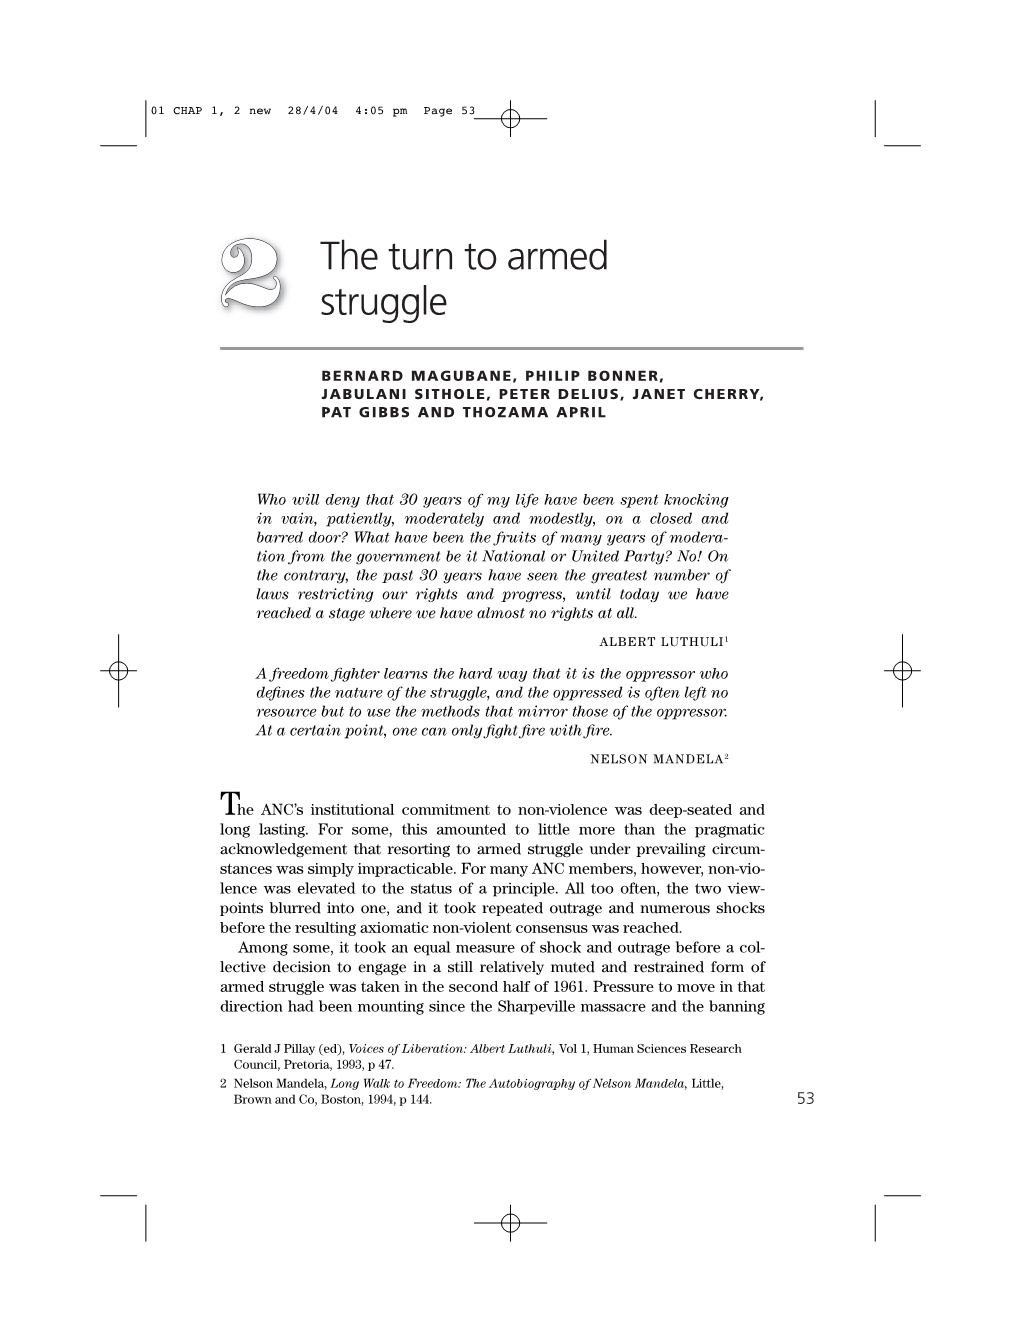 The Turn to Armed Struggle